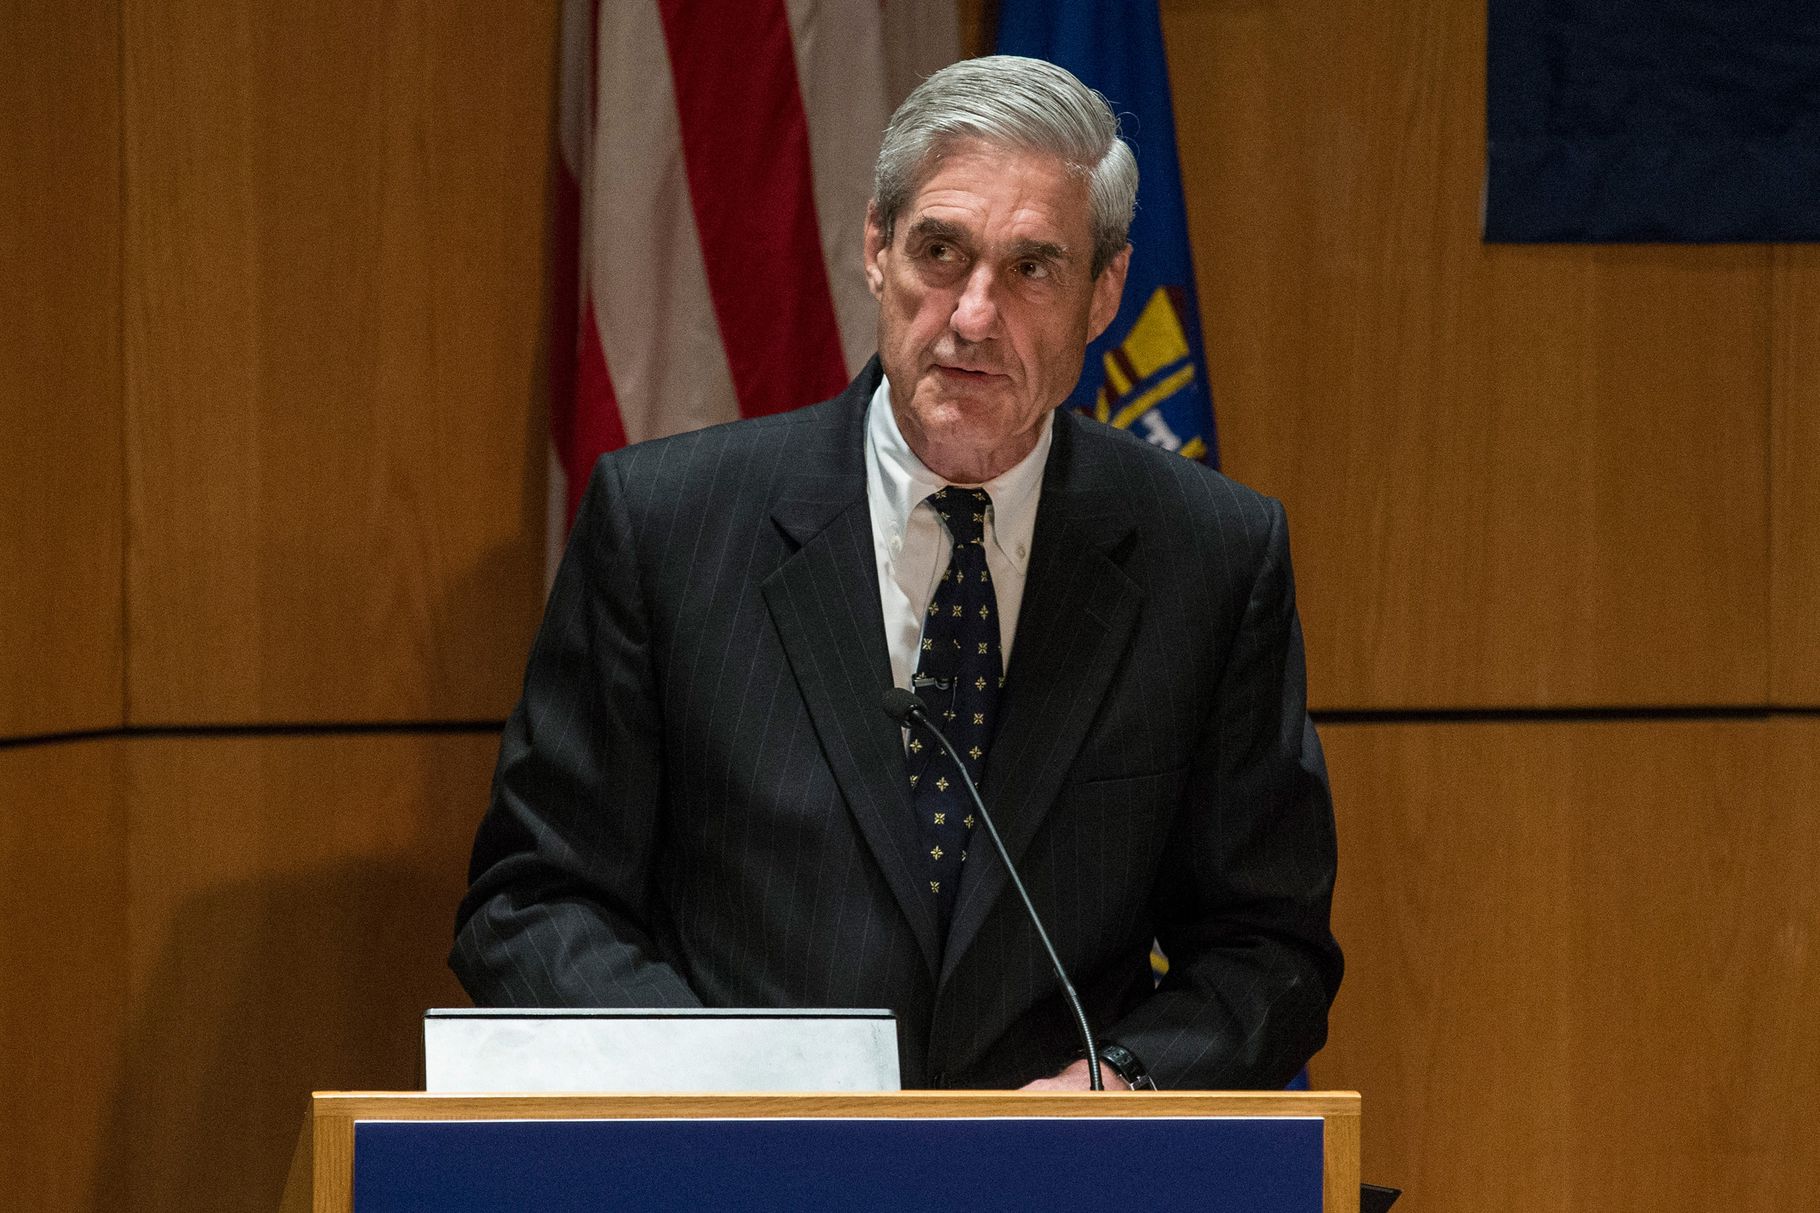 Mueller Indictment: Feds Charge 13 Russians, ‘Troll Factory’ With Conspiracy To Meddle in 2016 Elections